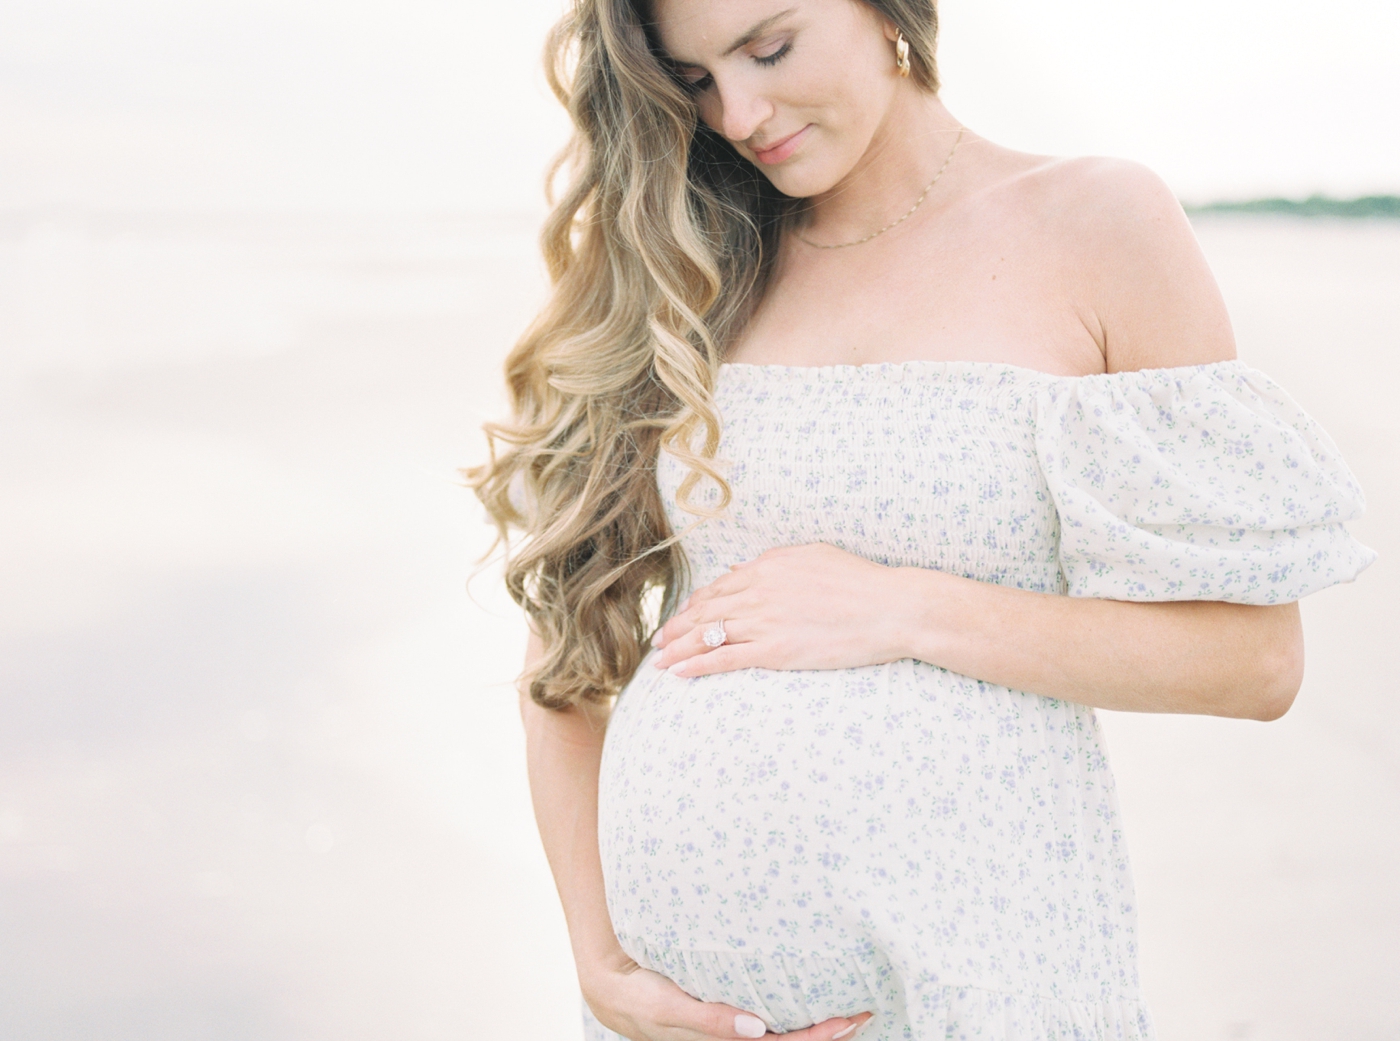 Mom to be in blue and white dress cradling her belly | Photo by Caitlyn Motycka Photography.